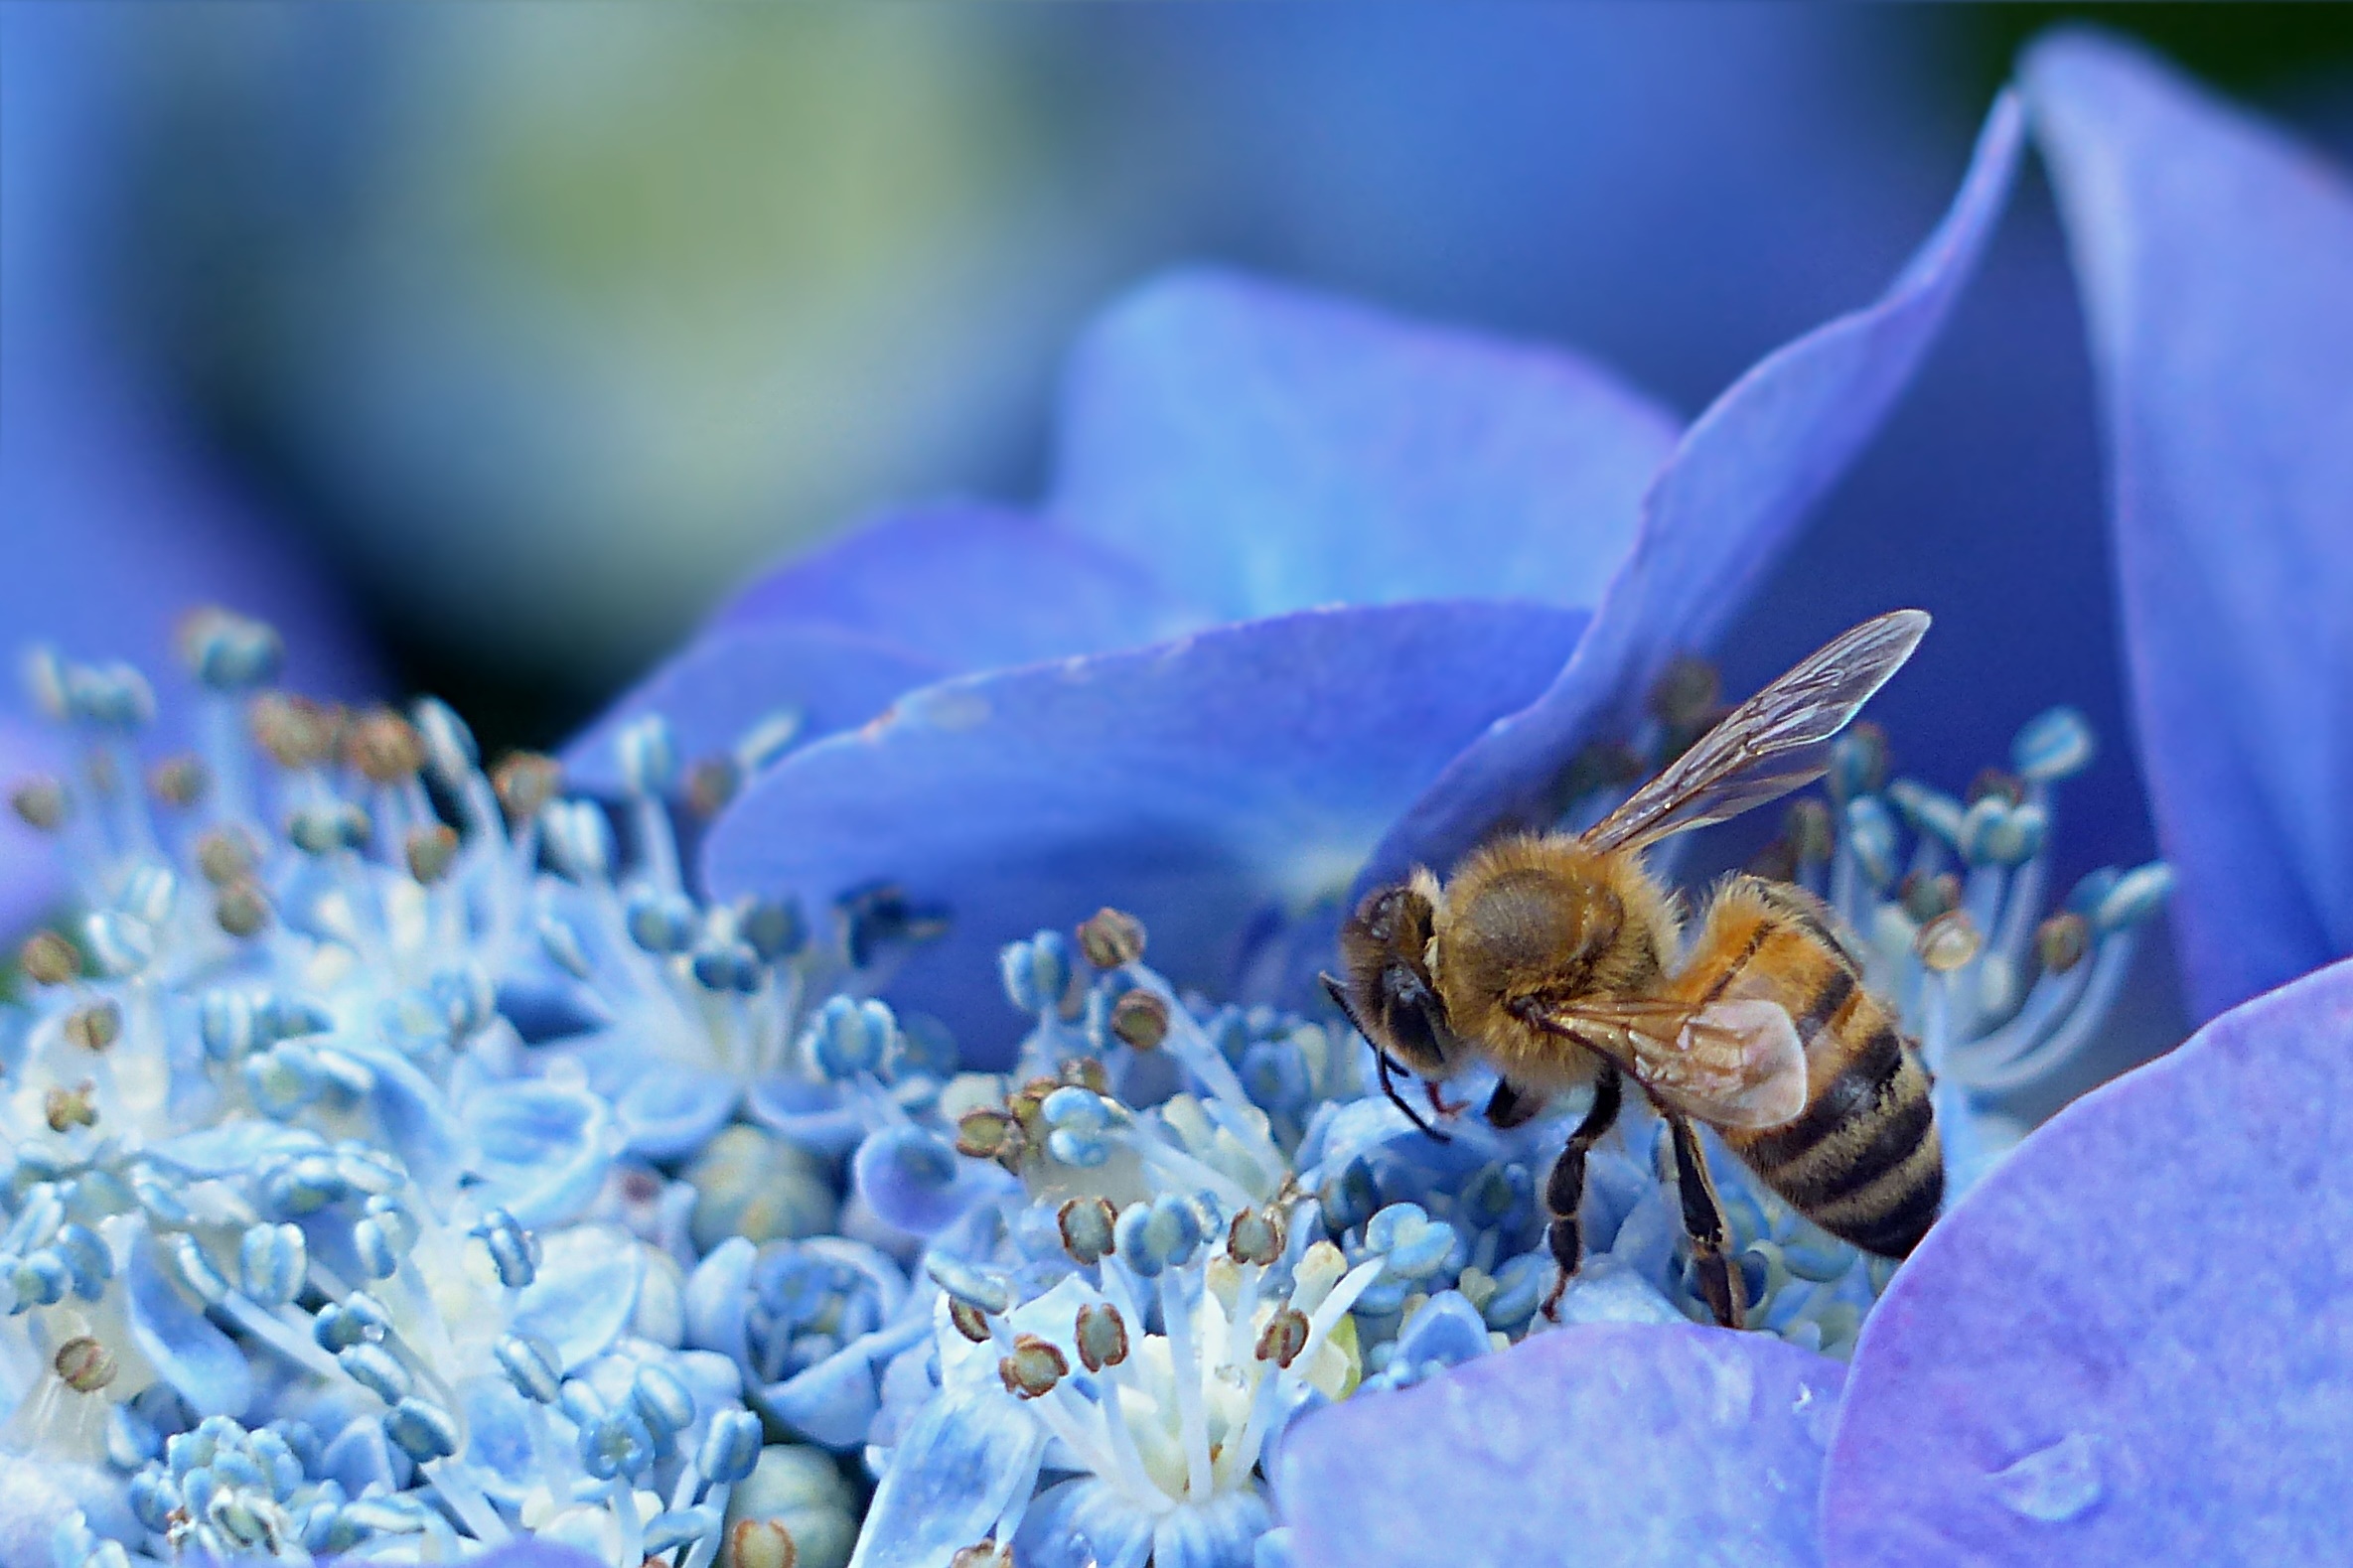 121839 download wallpaper flower, macro, bee, hydrangea, pollination screensavers and pictures for free